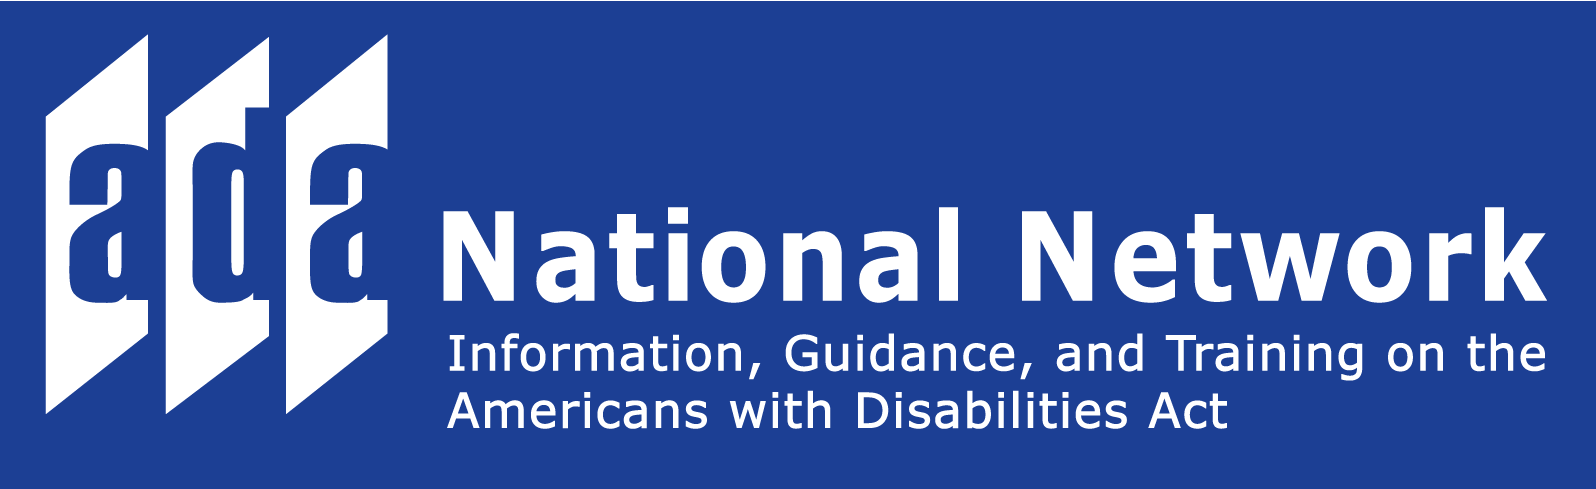 ADA National Network Information Guidance and Training on the Americans with Disabilities Act 